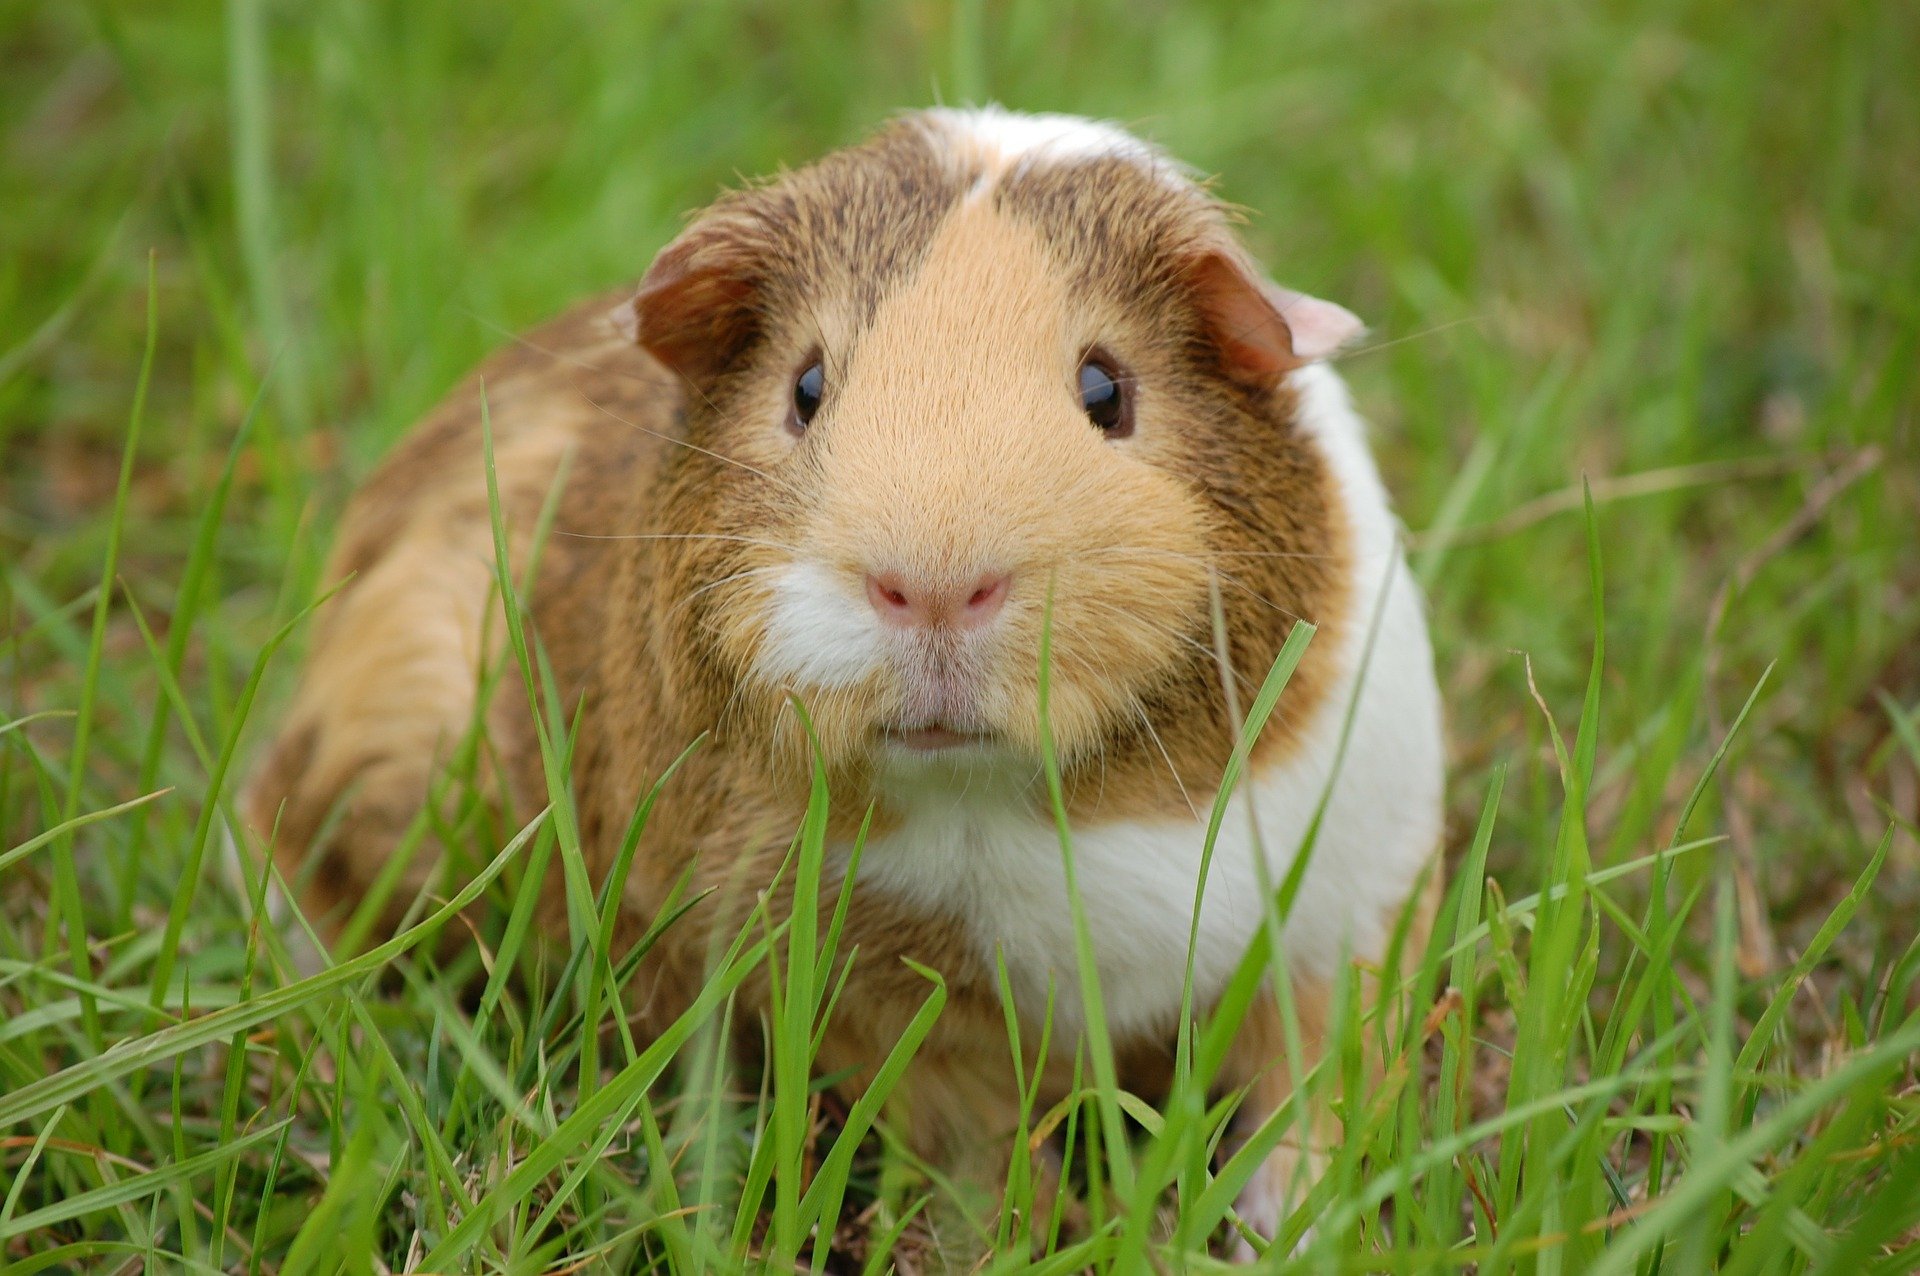 So, you want to adopt a guinea pig